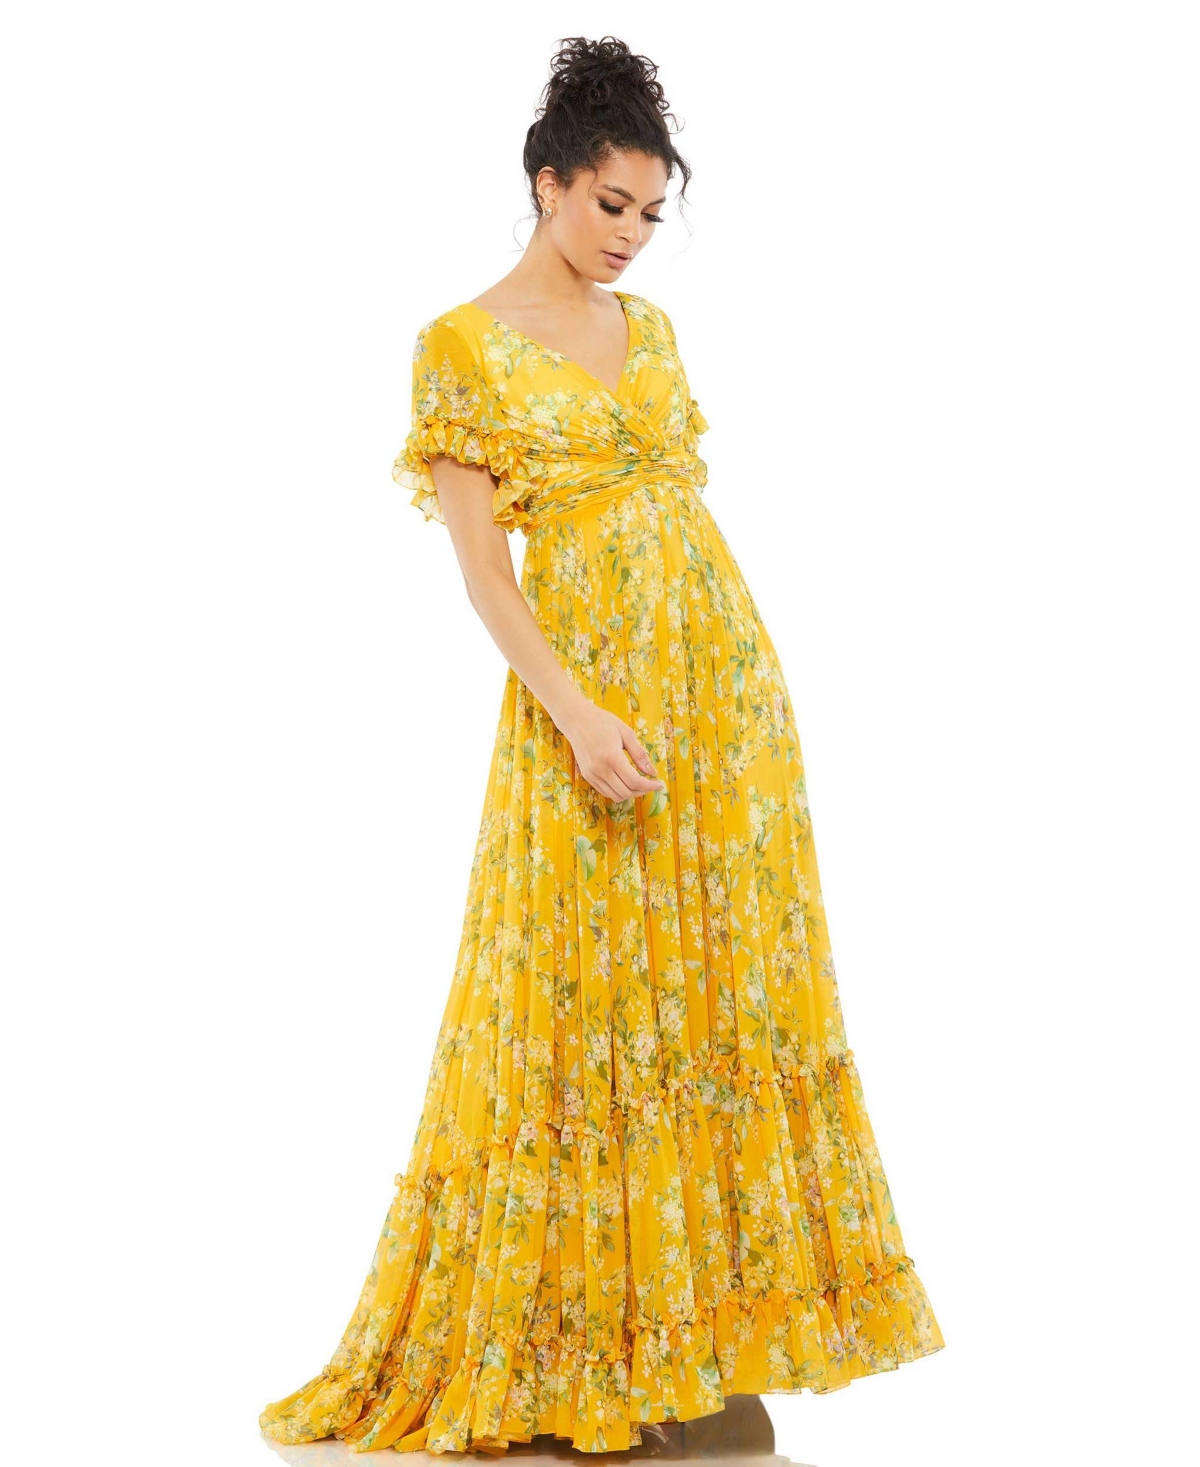 70s Prom, Formal, Evening, Party Dresses Mac Duggal Womens Womens Ieena Flounce Sleeve Floral Maxi Dress - Yellow Multi $298.00 AT vintagedancer.com